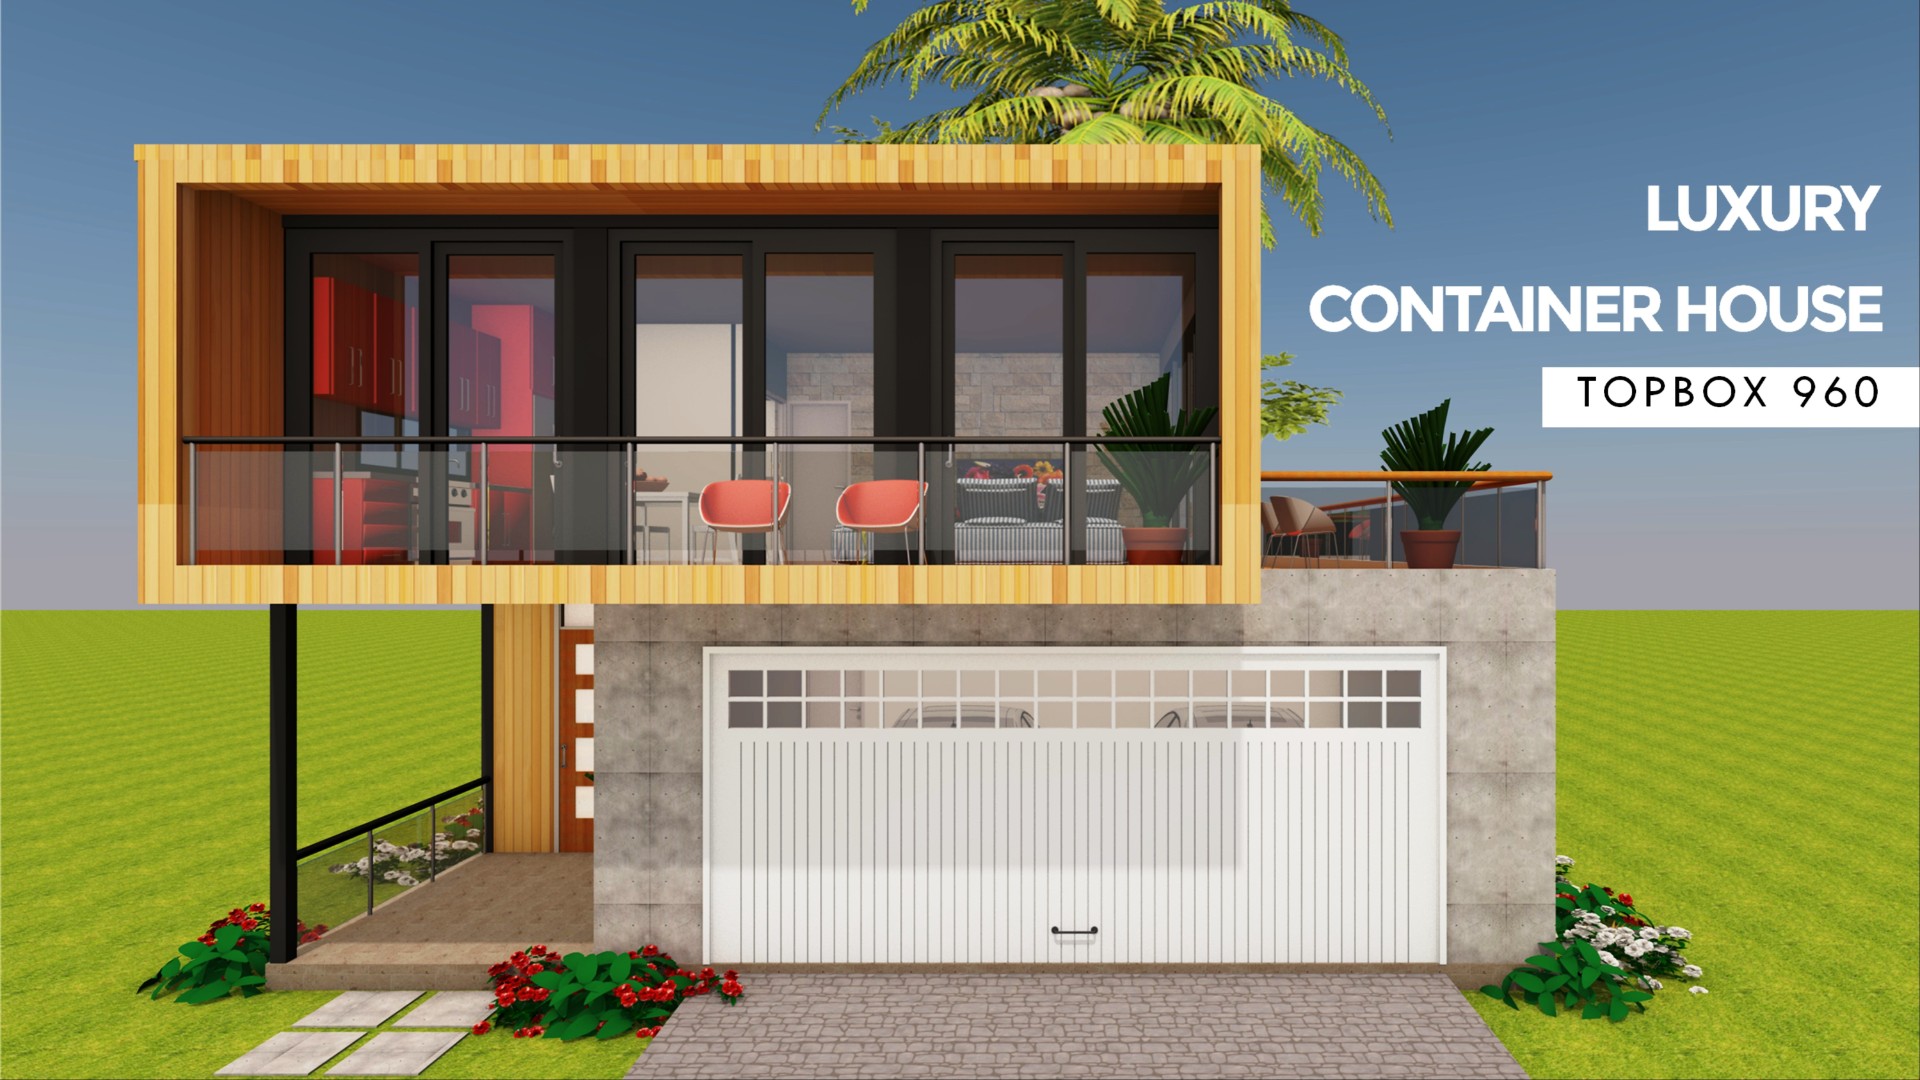 Luxury Shipping Container House Design with 3000+ Square Feet Floor Plans | TOPBOX 960